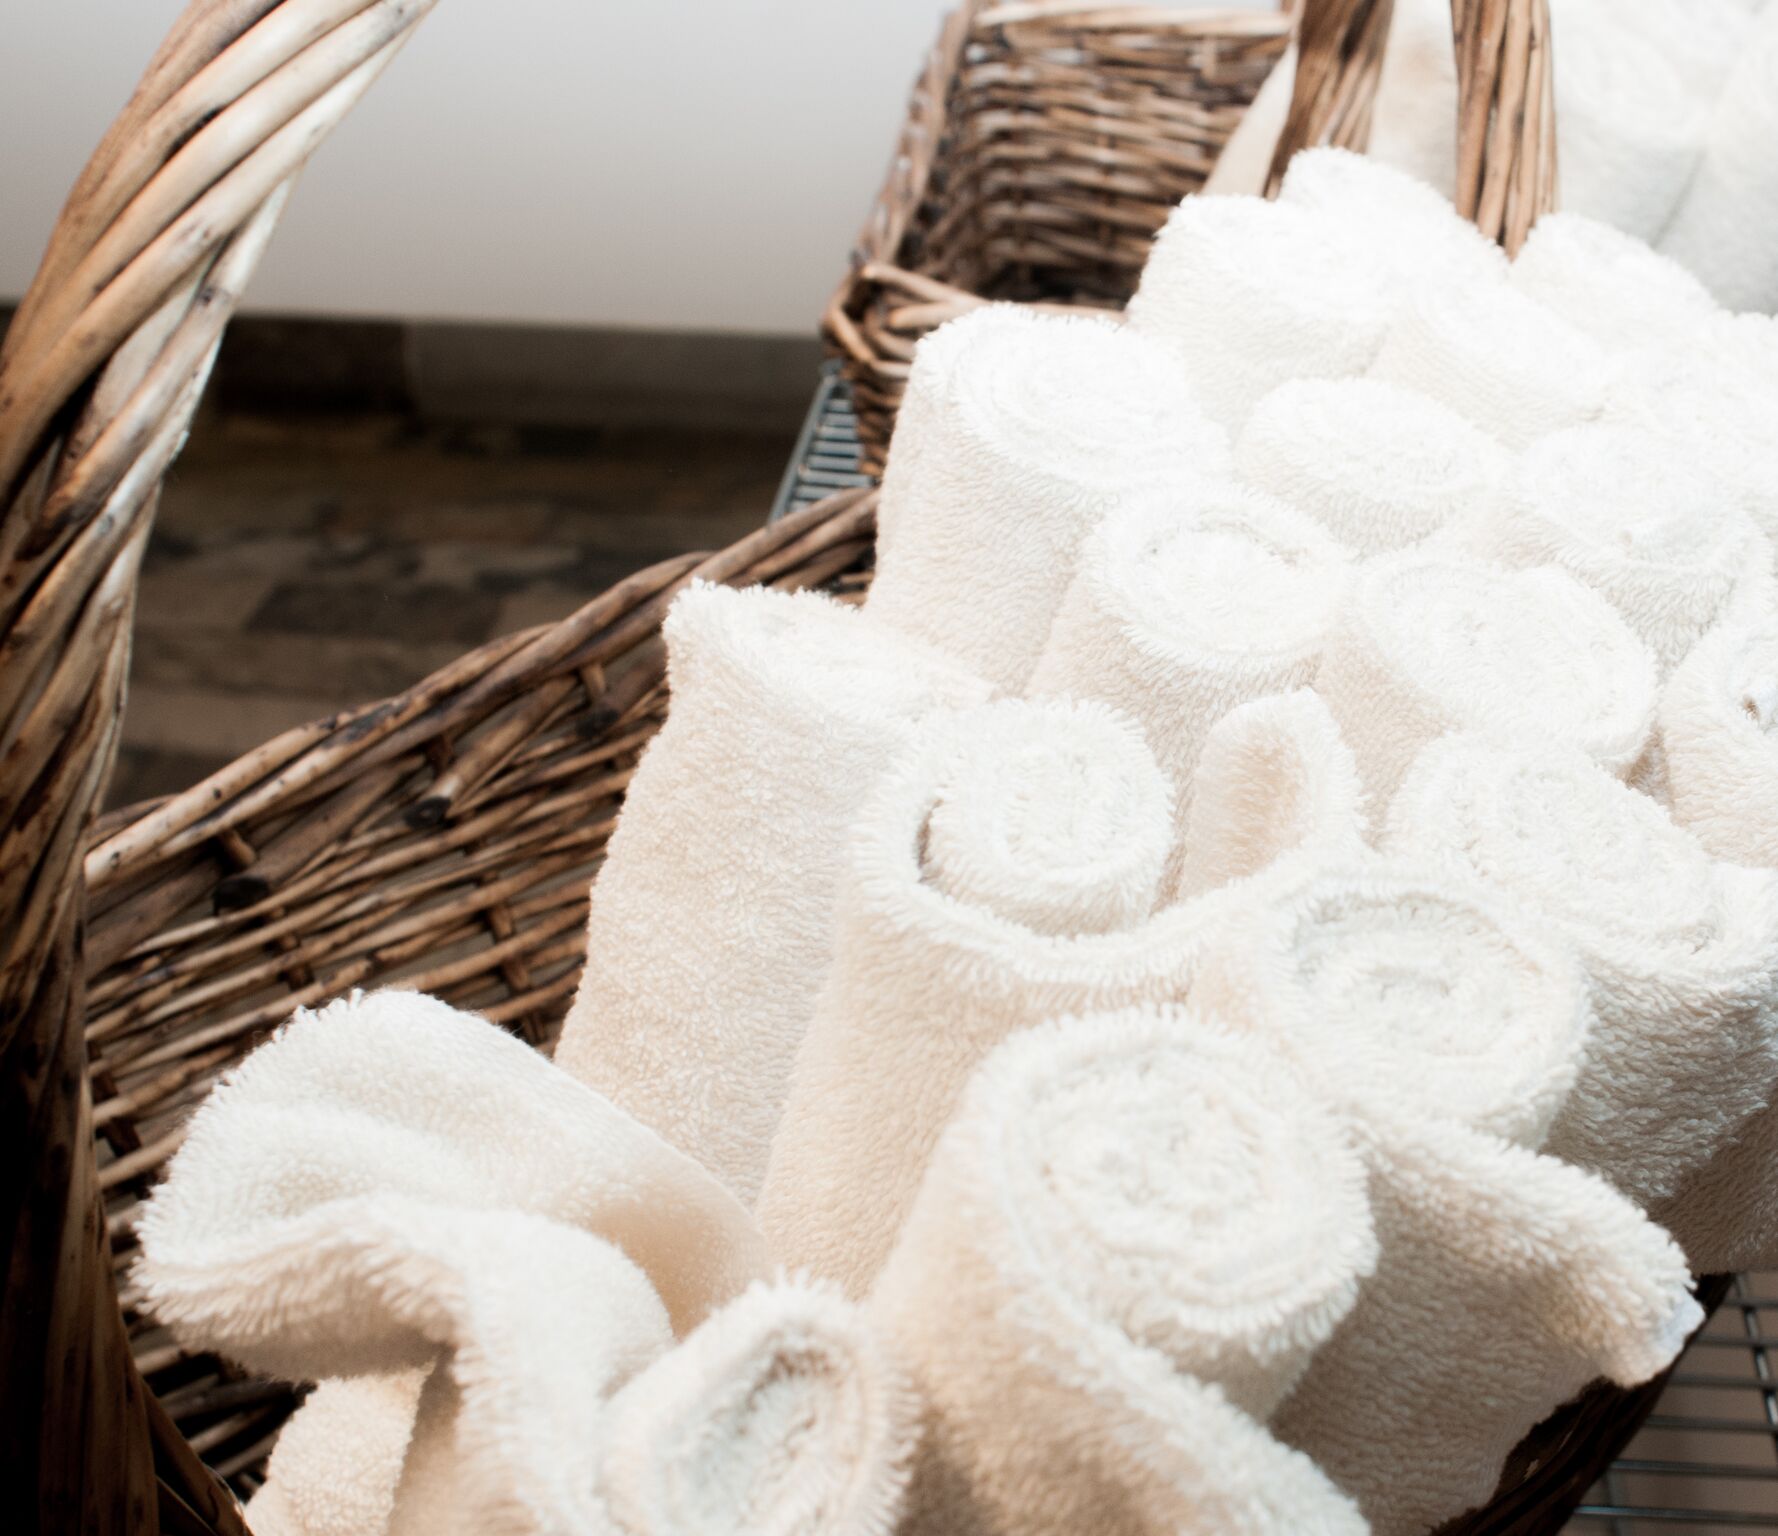 Brown basket with white towels inside